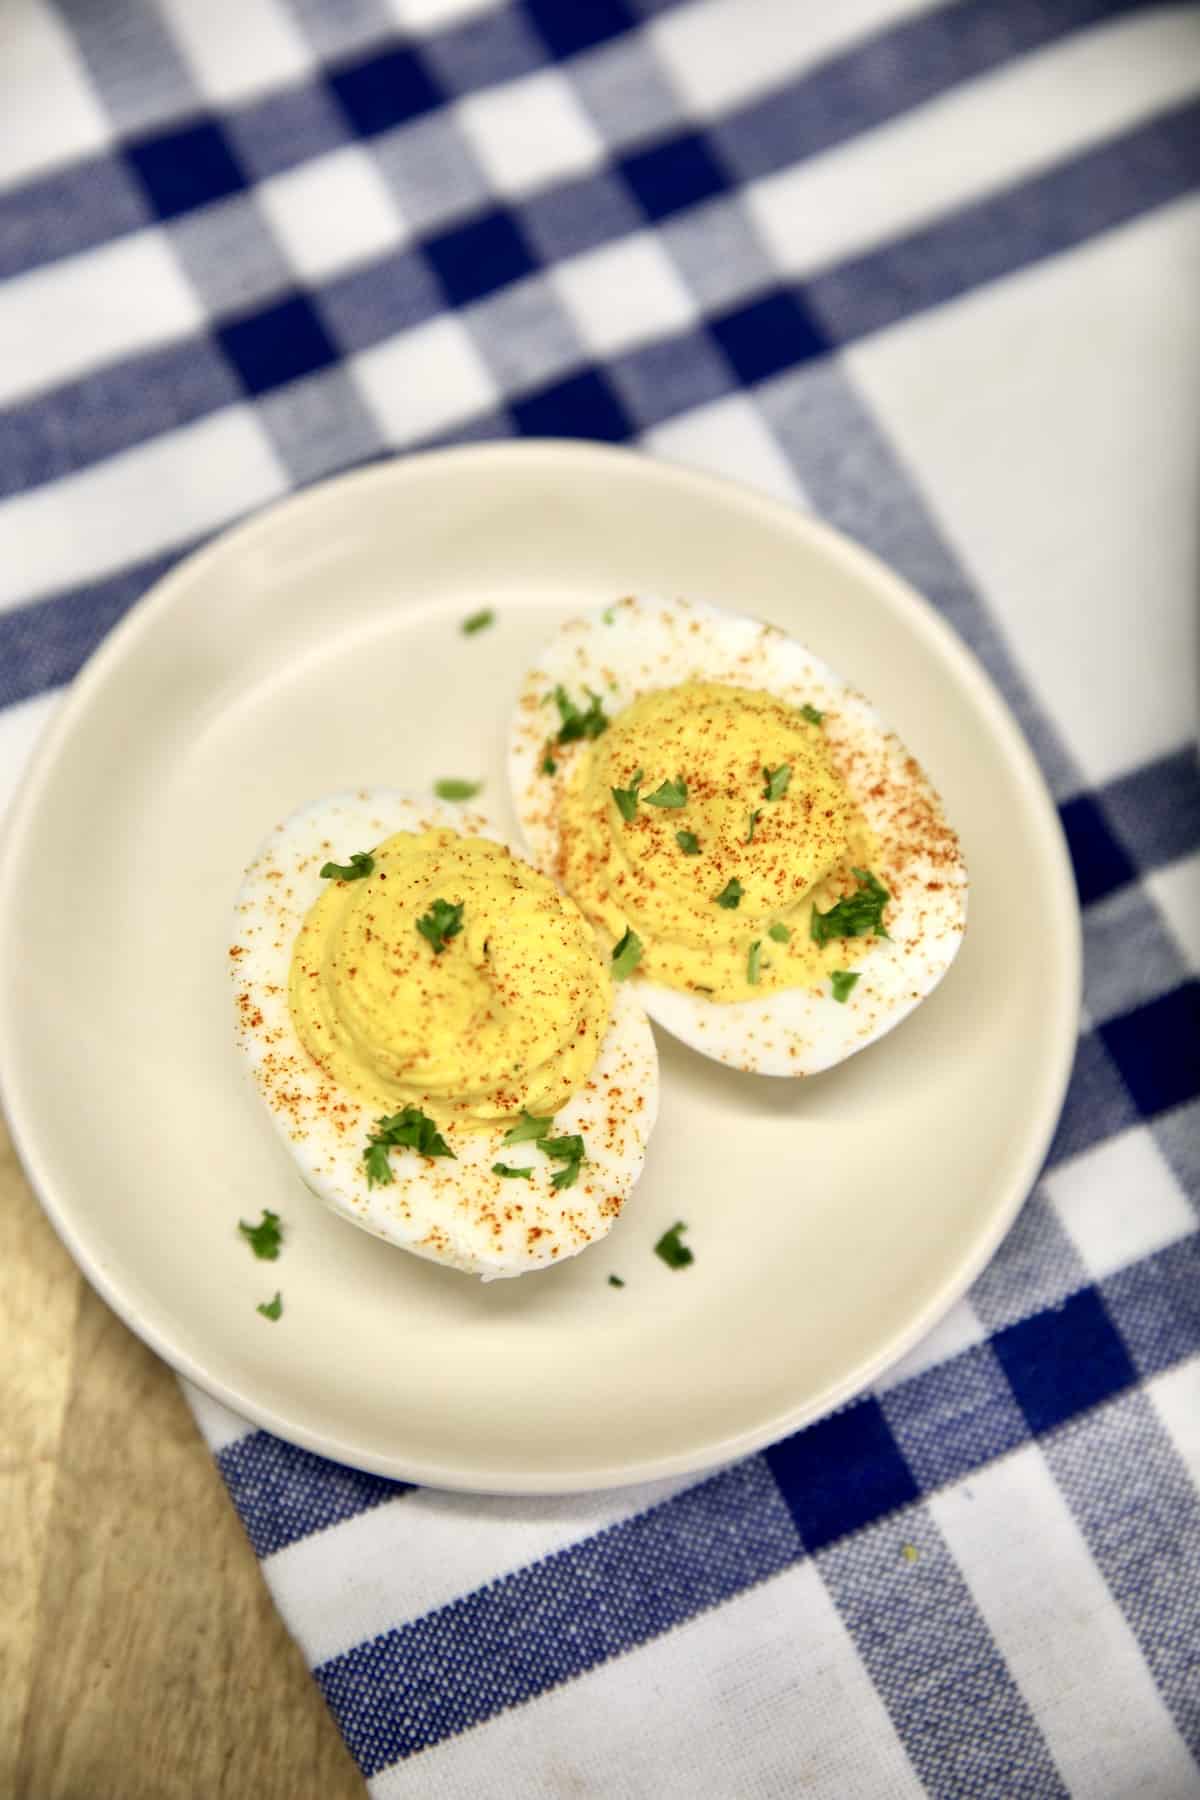 Small appetizer plate with 2 deviled eggs on a blue and white napkin.